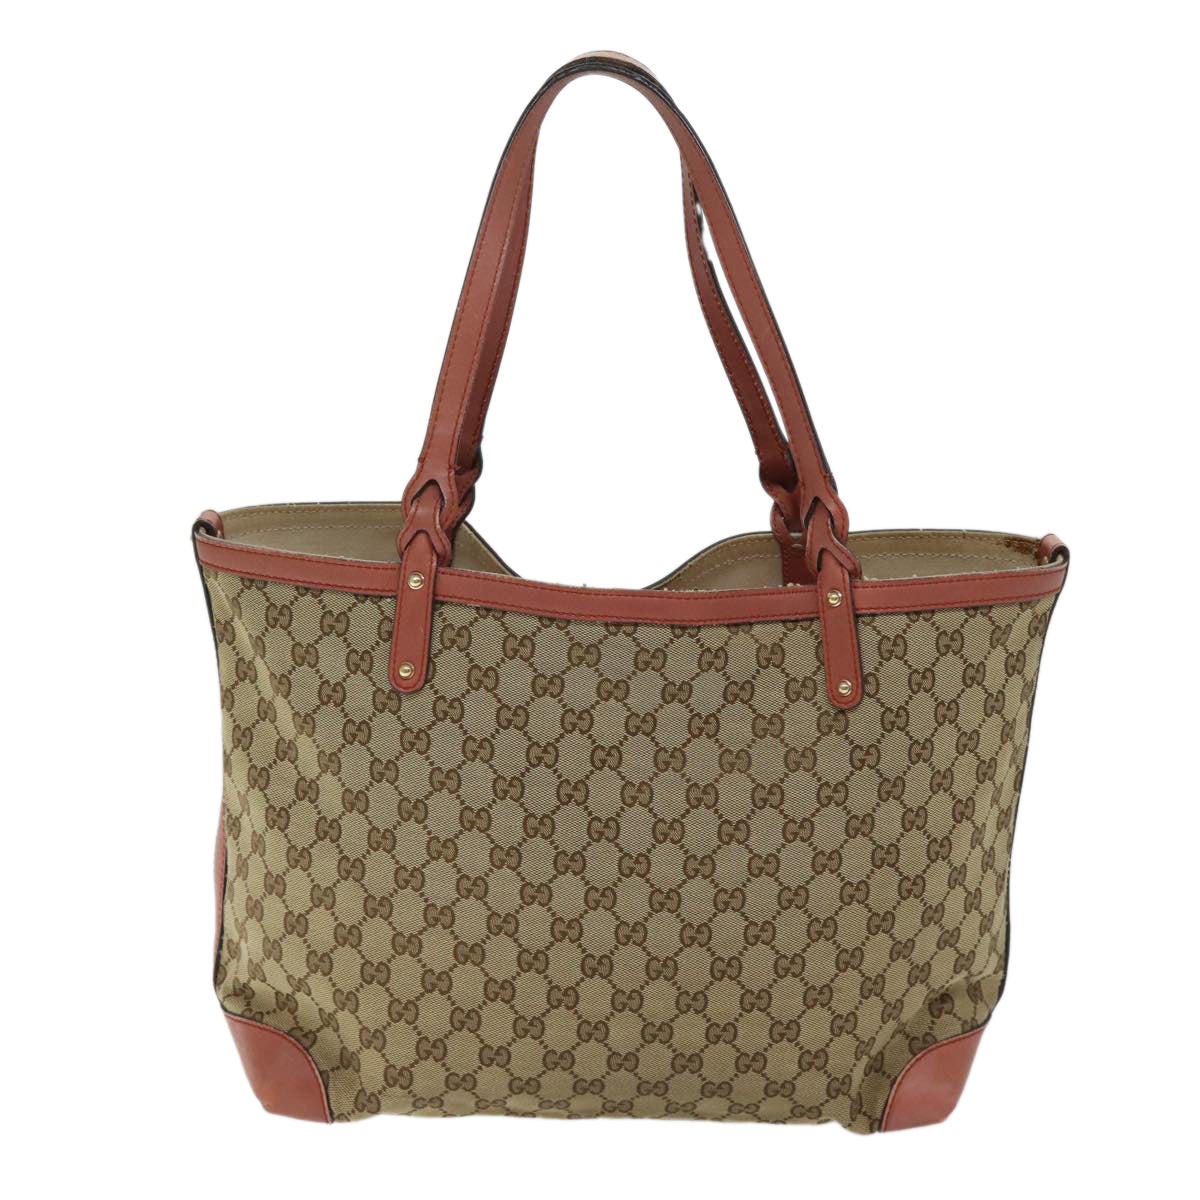 GUCCI GG Canvas Tote Bag Beige 247209 Auth bs13573